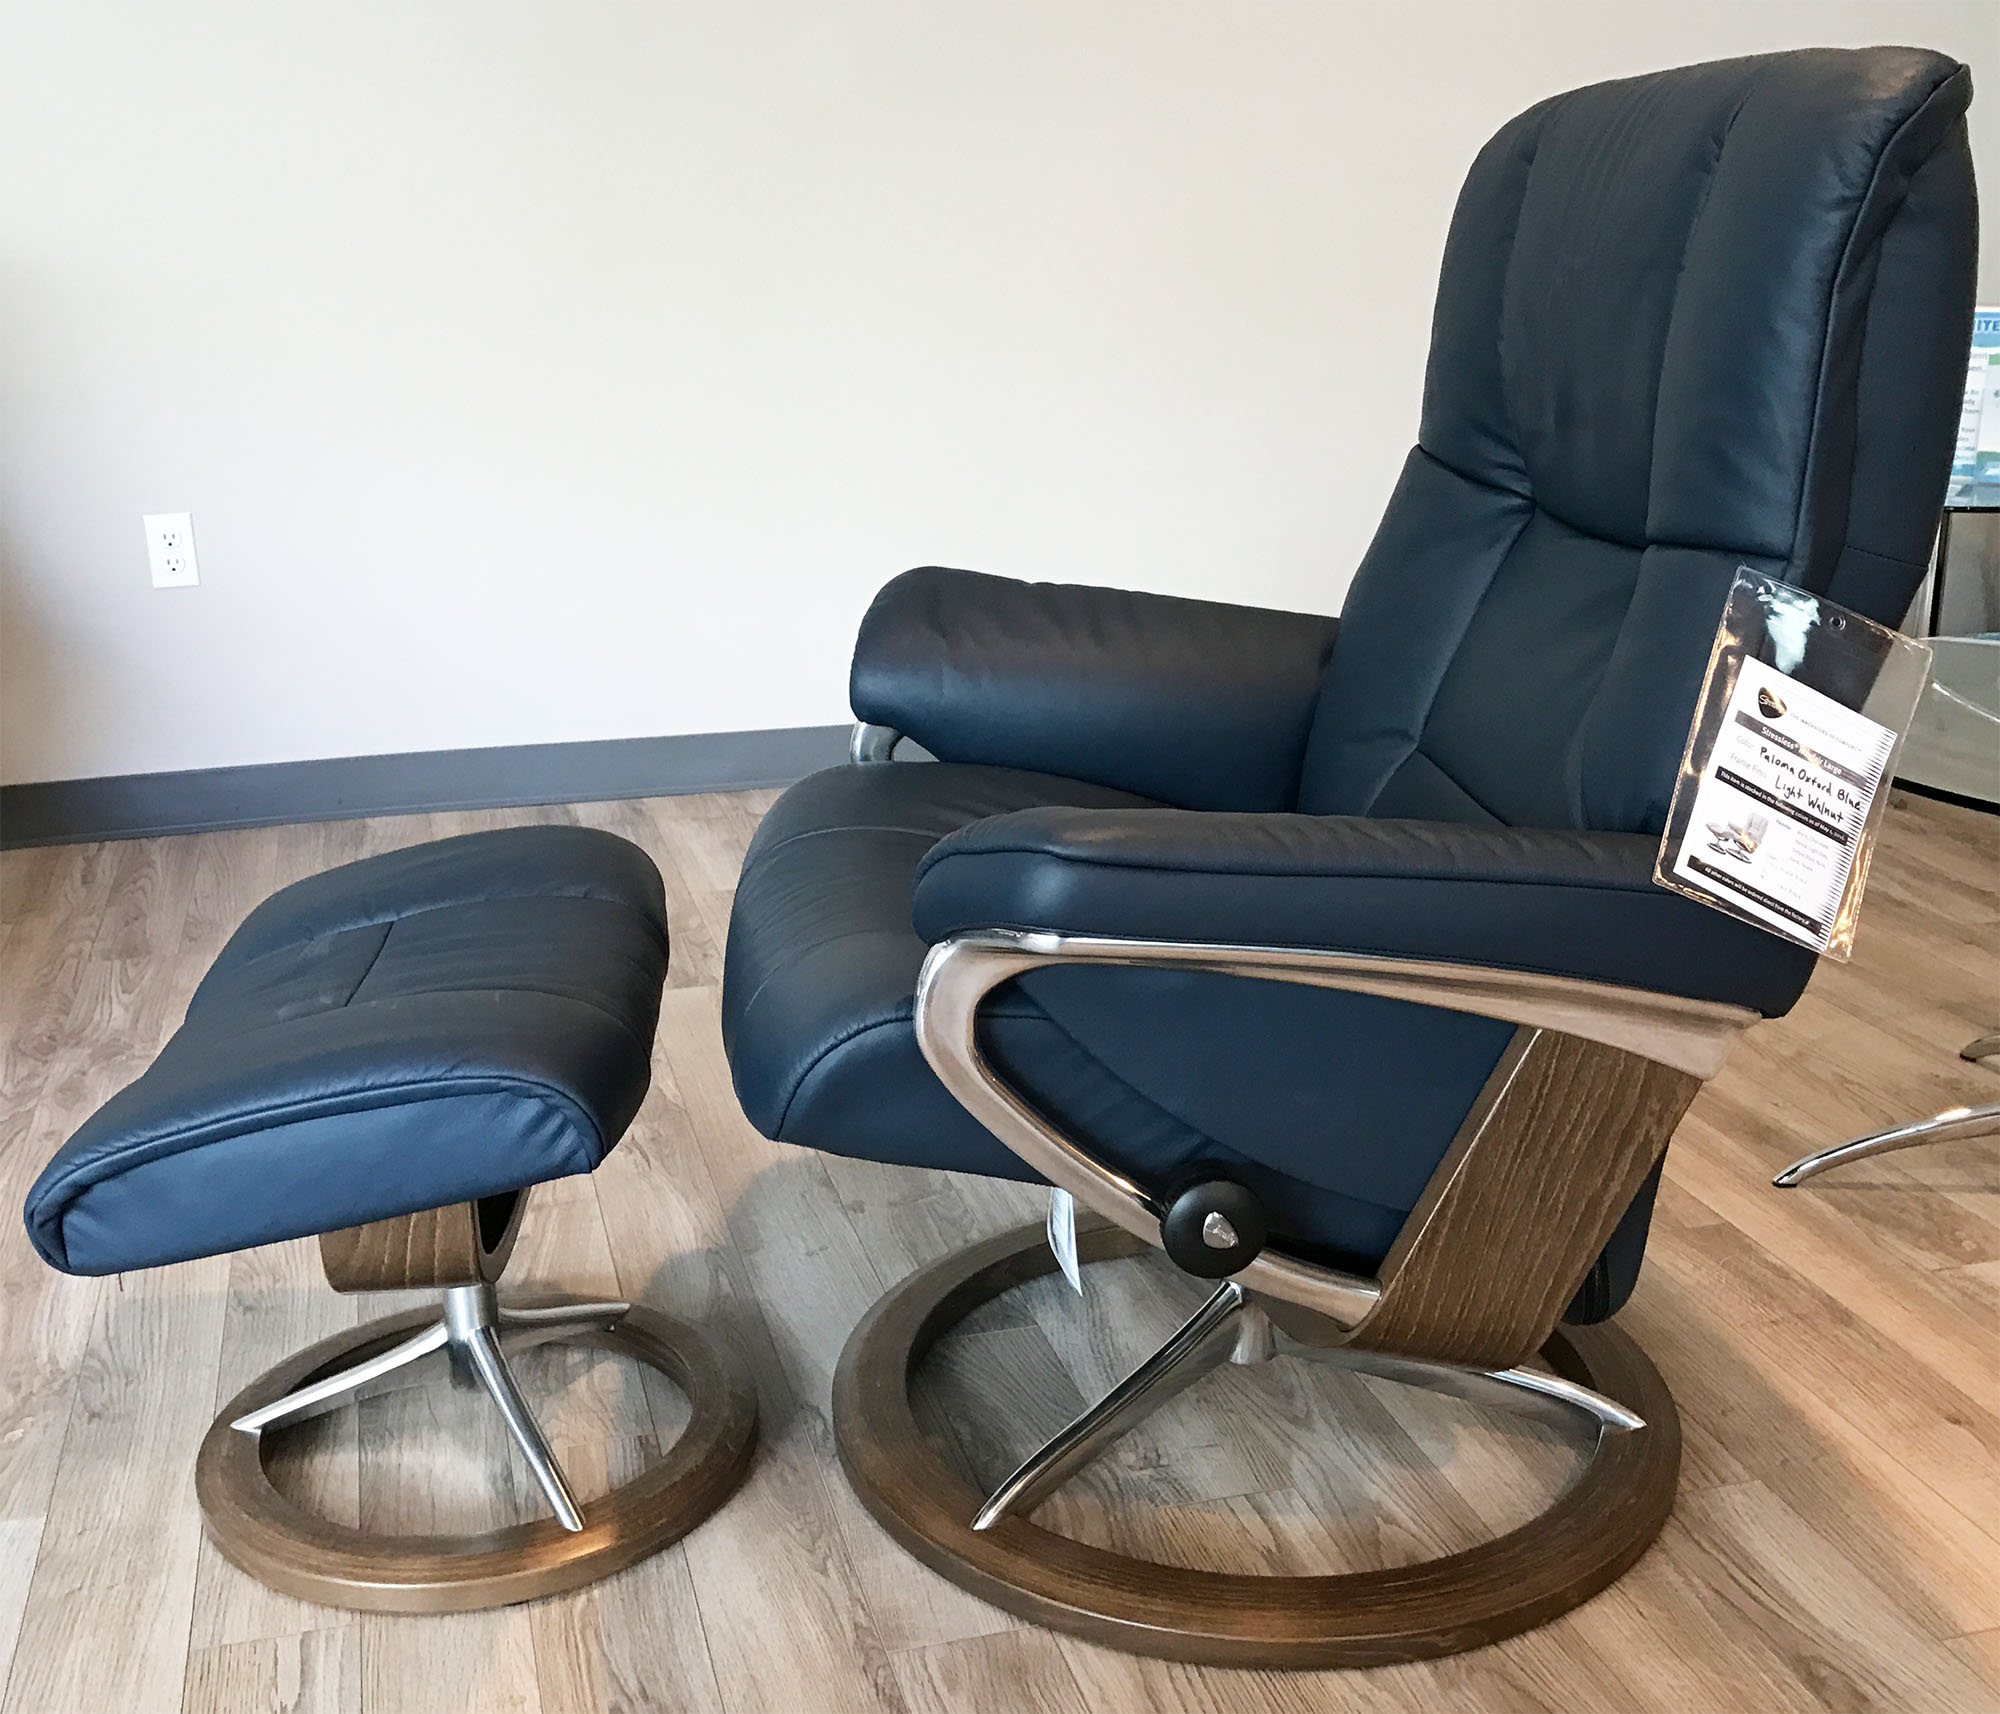 Recliner Stressless by Leather Wood Chair Walnut Paloma Mayfair Blue Ottoman Ekornes Oxford and Signature